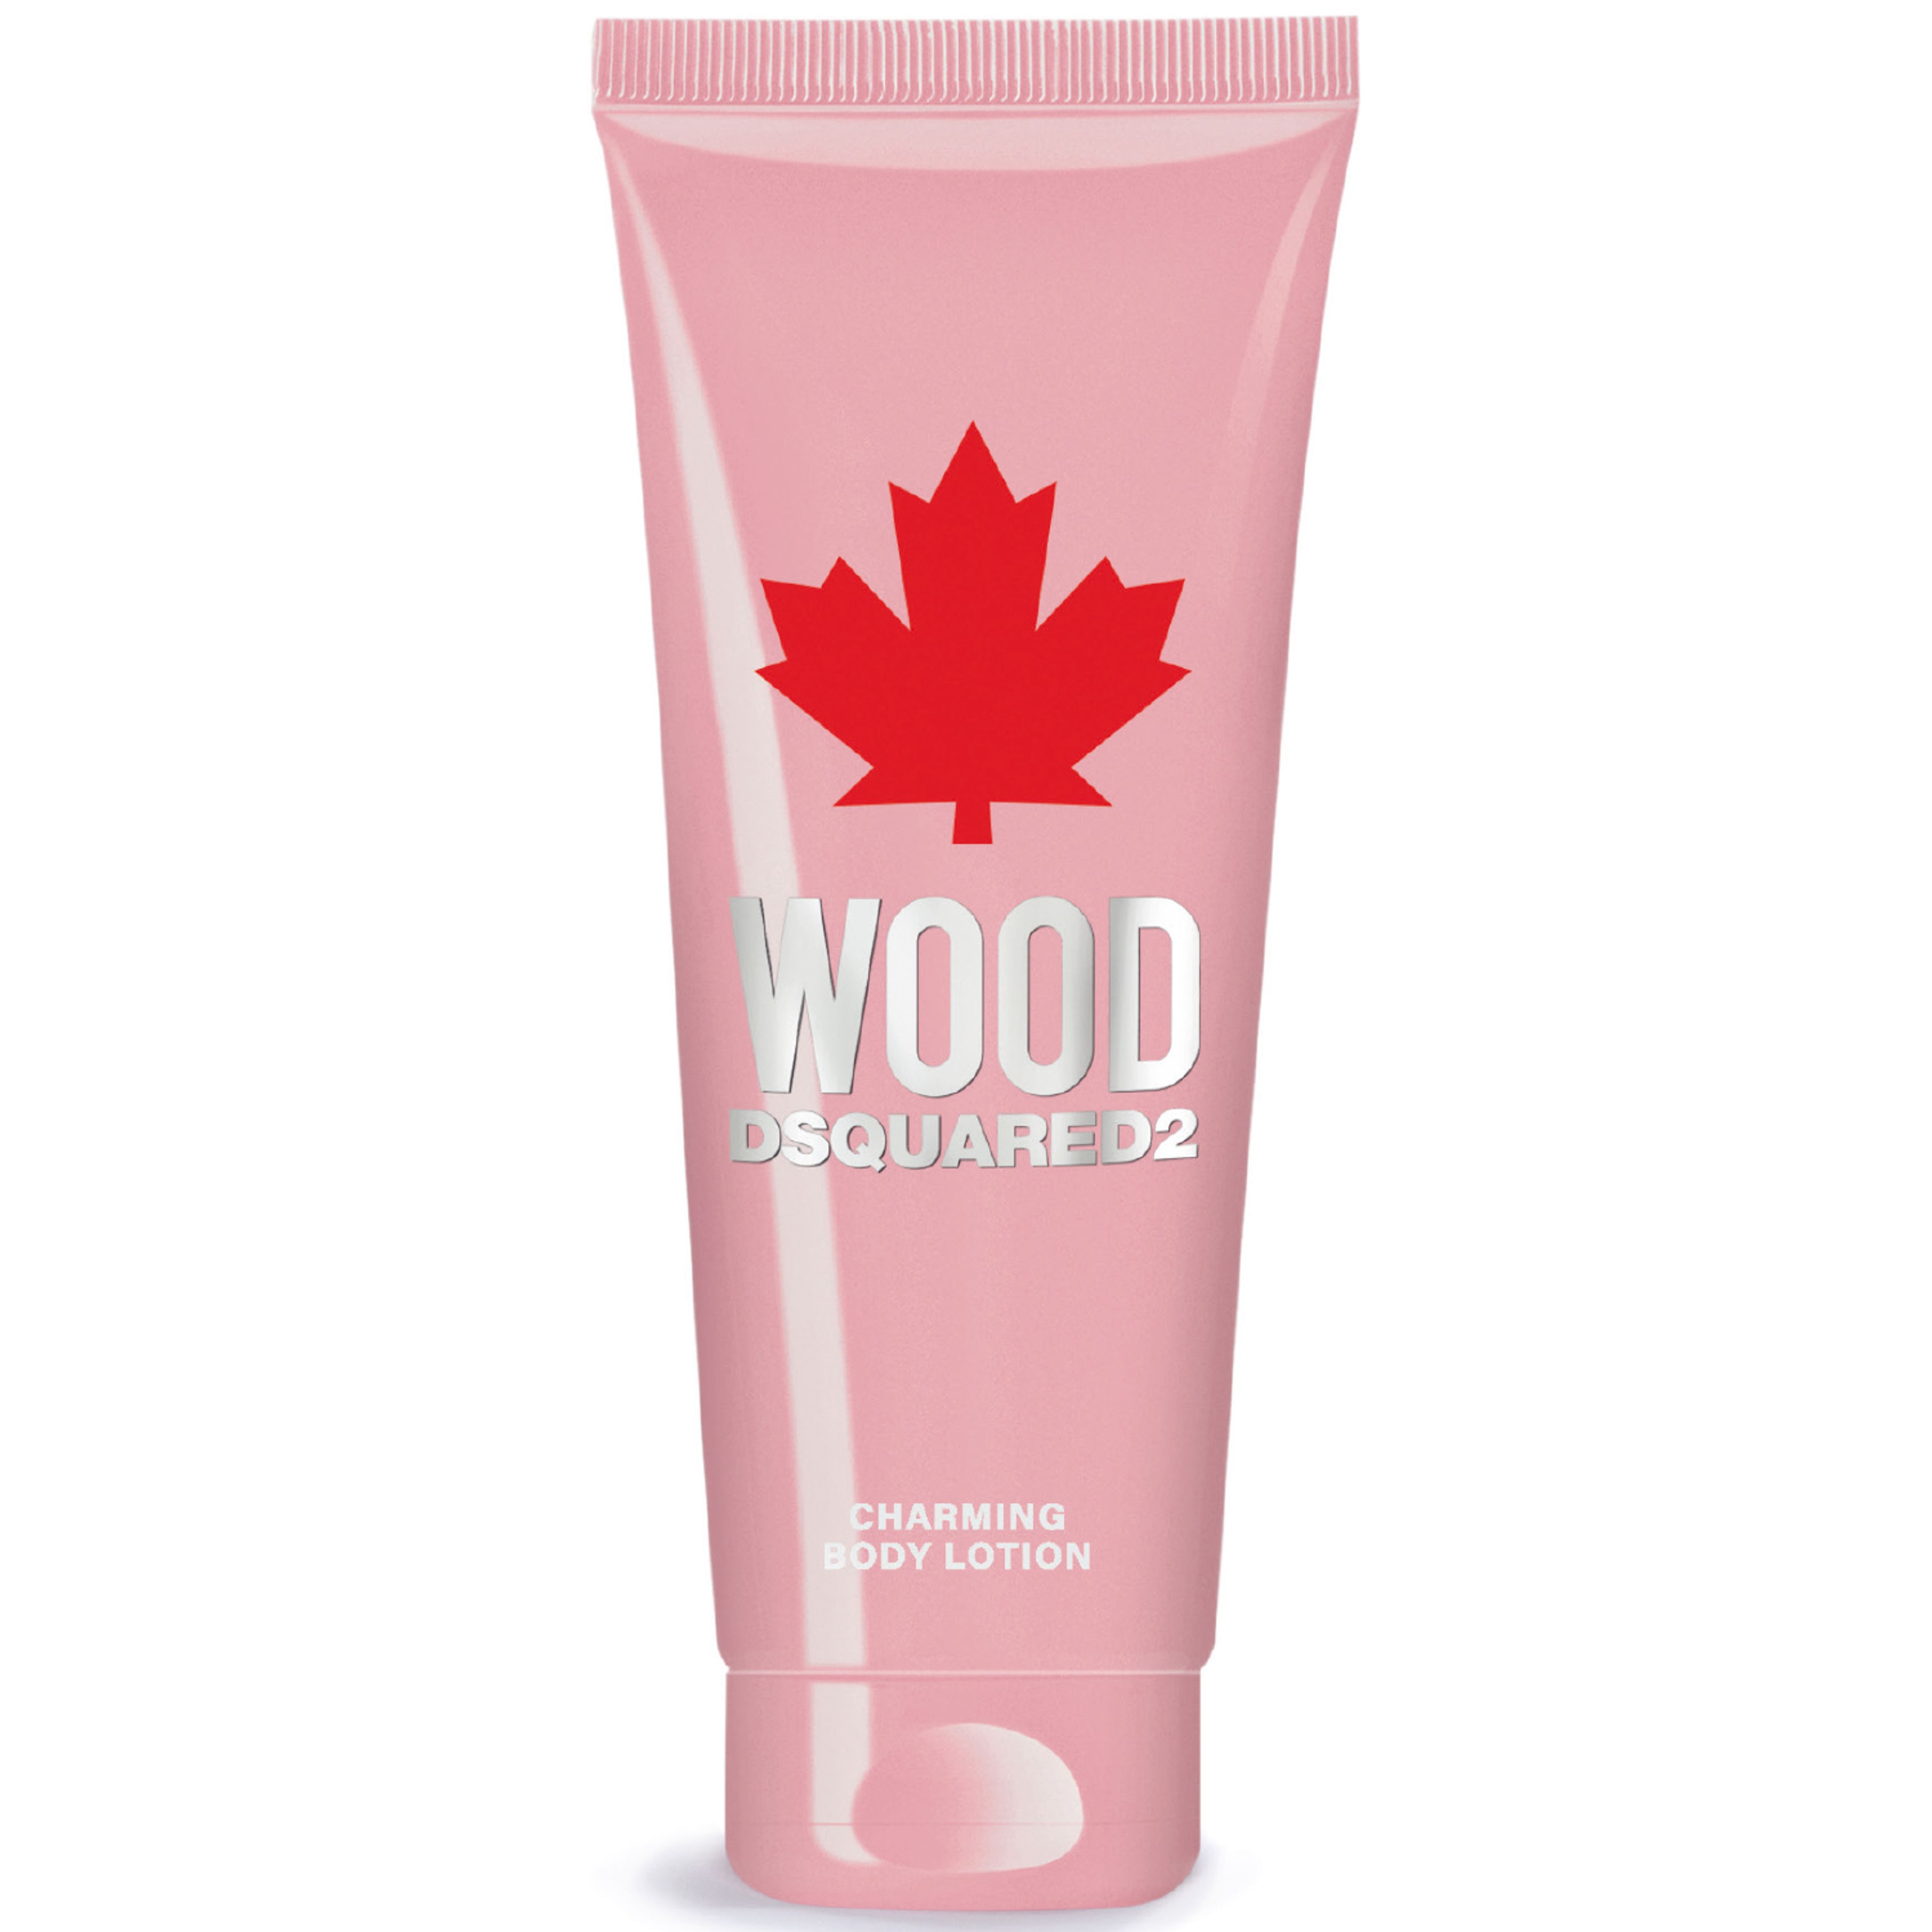 Dsquared2 Wood Pour Femme Charming Body Lotion 1